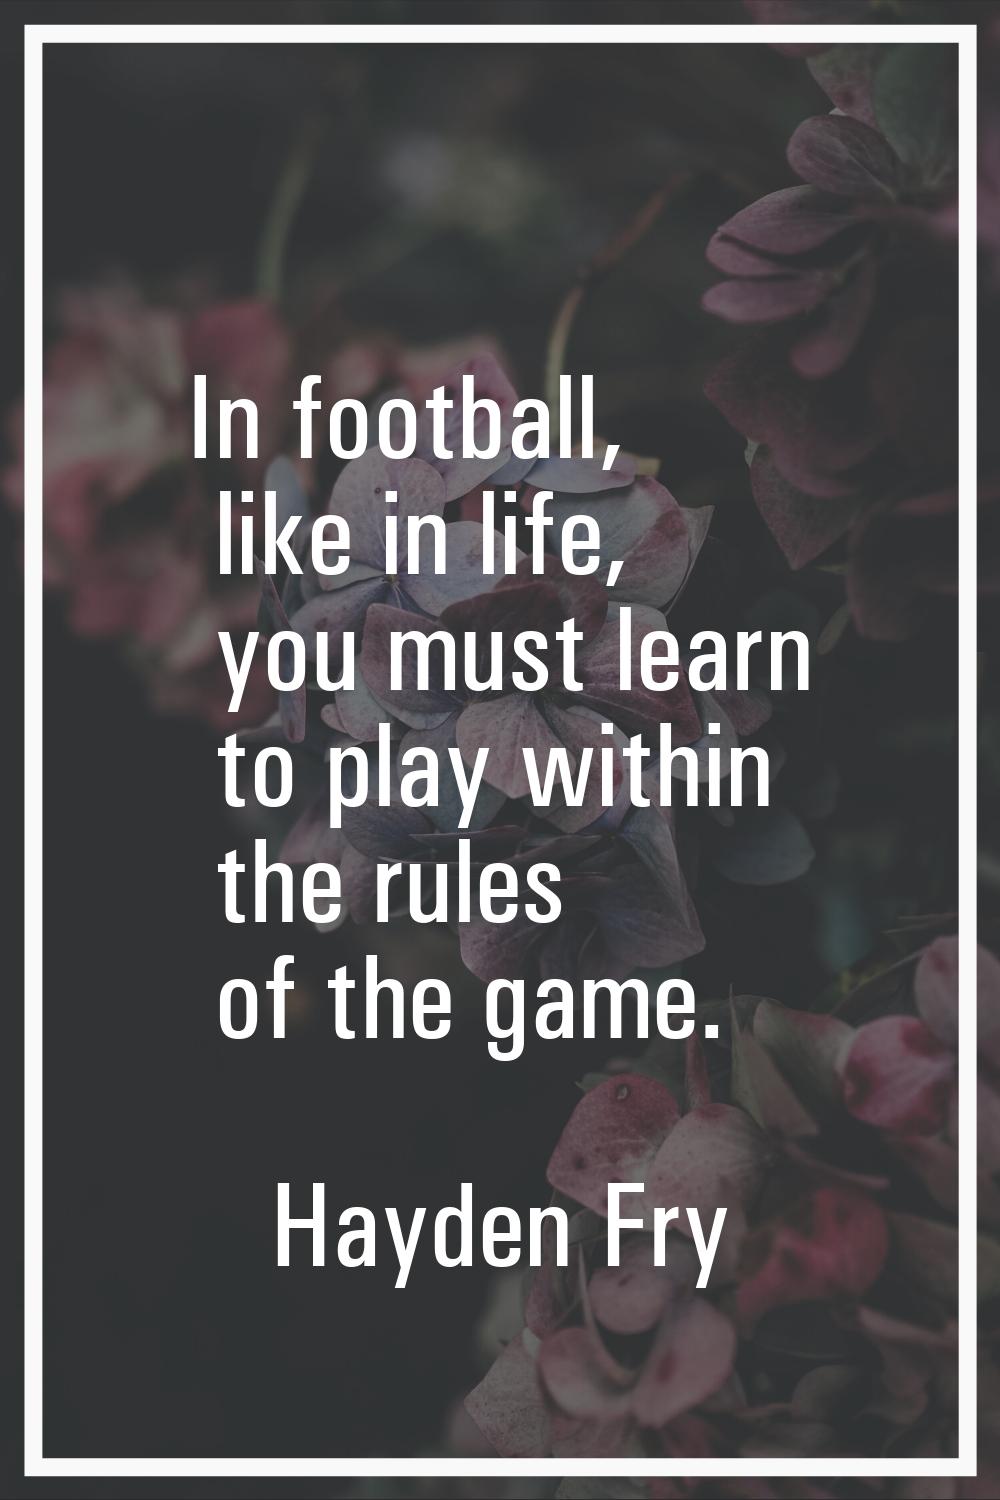 In football, like in life, you must learn to play within the rules of the game.